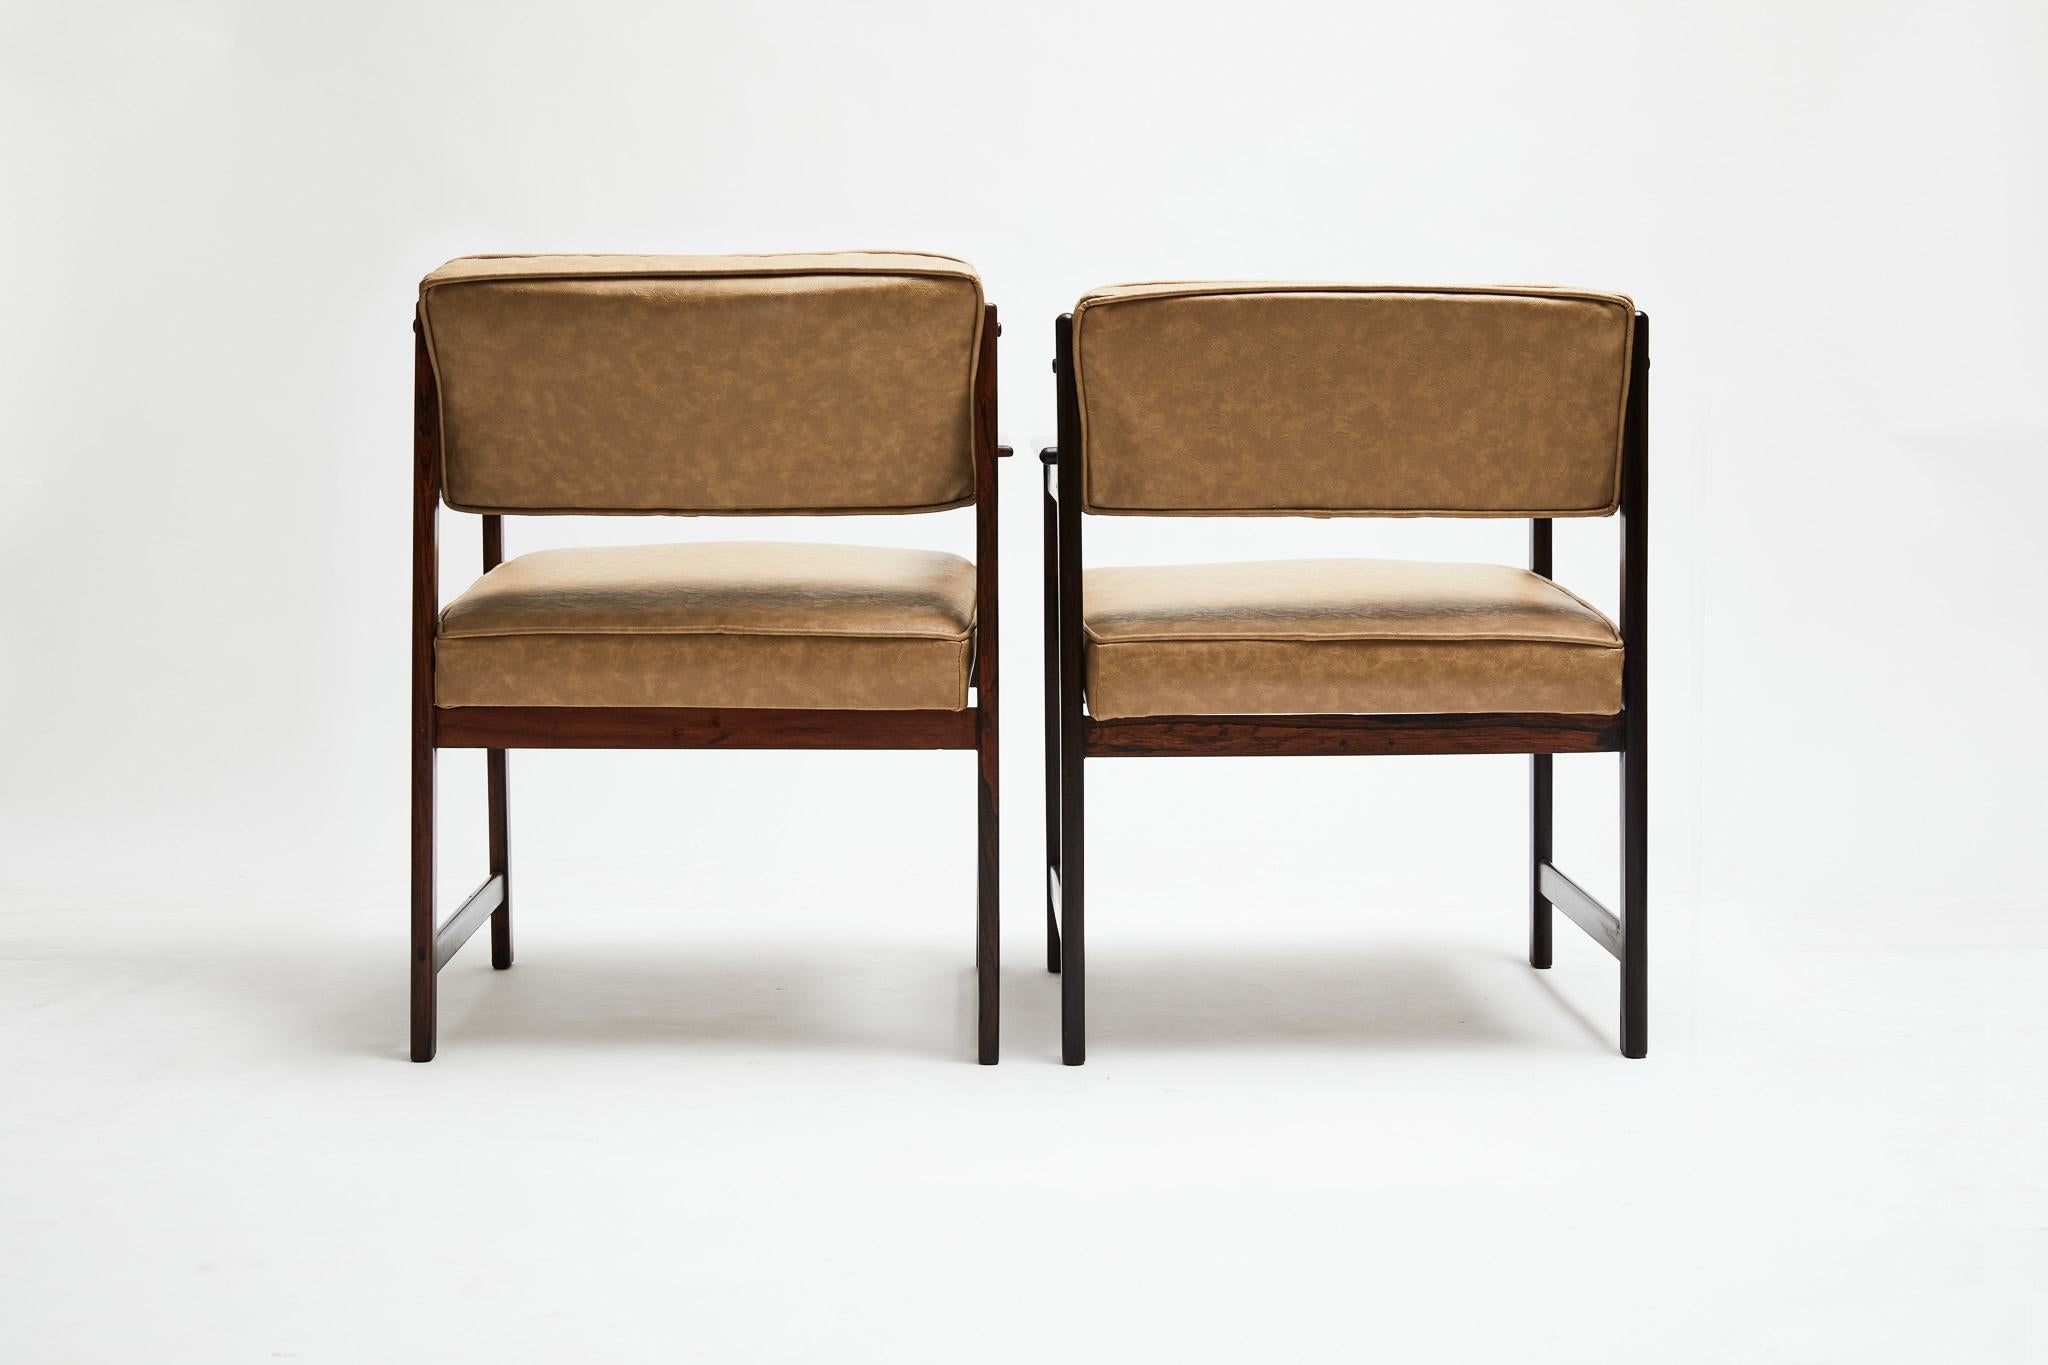 Hand-Painted Midcentury Modern Armchairs in Hardwood & Beige Leather by Jorge Jabour, Brazil